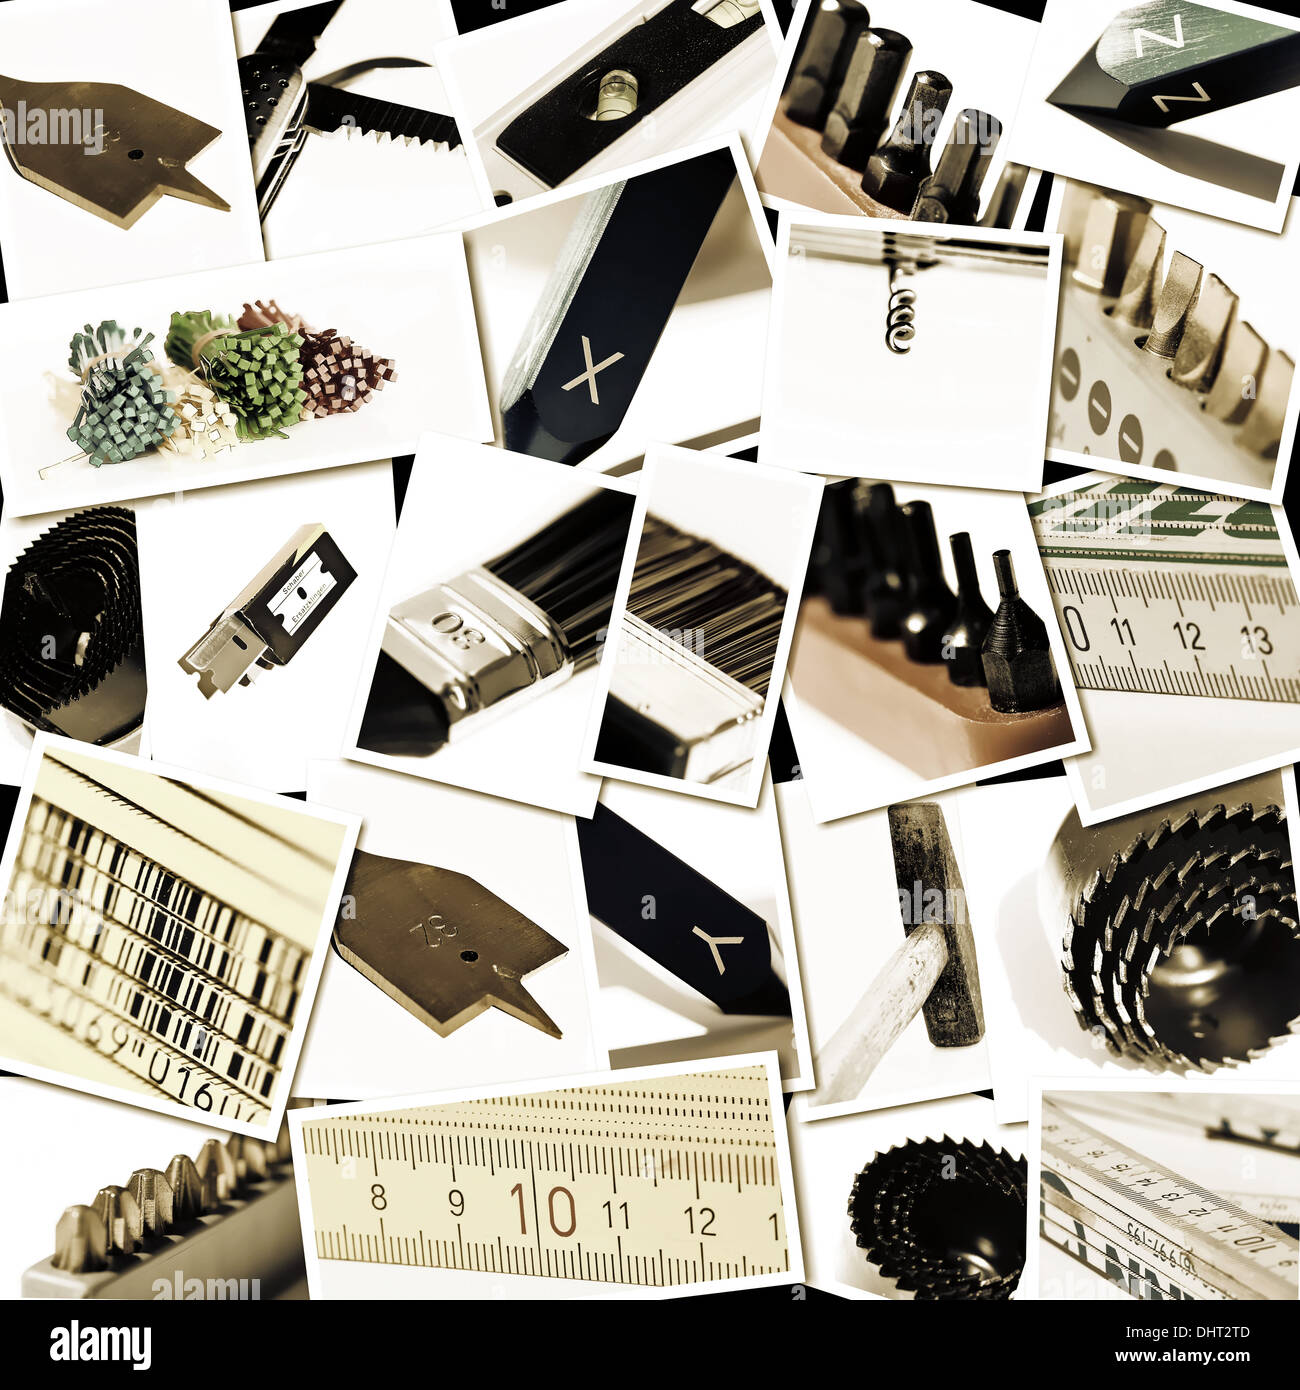 hand tools collage Stock Photo